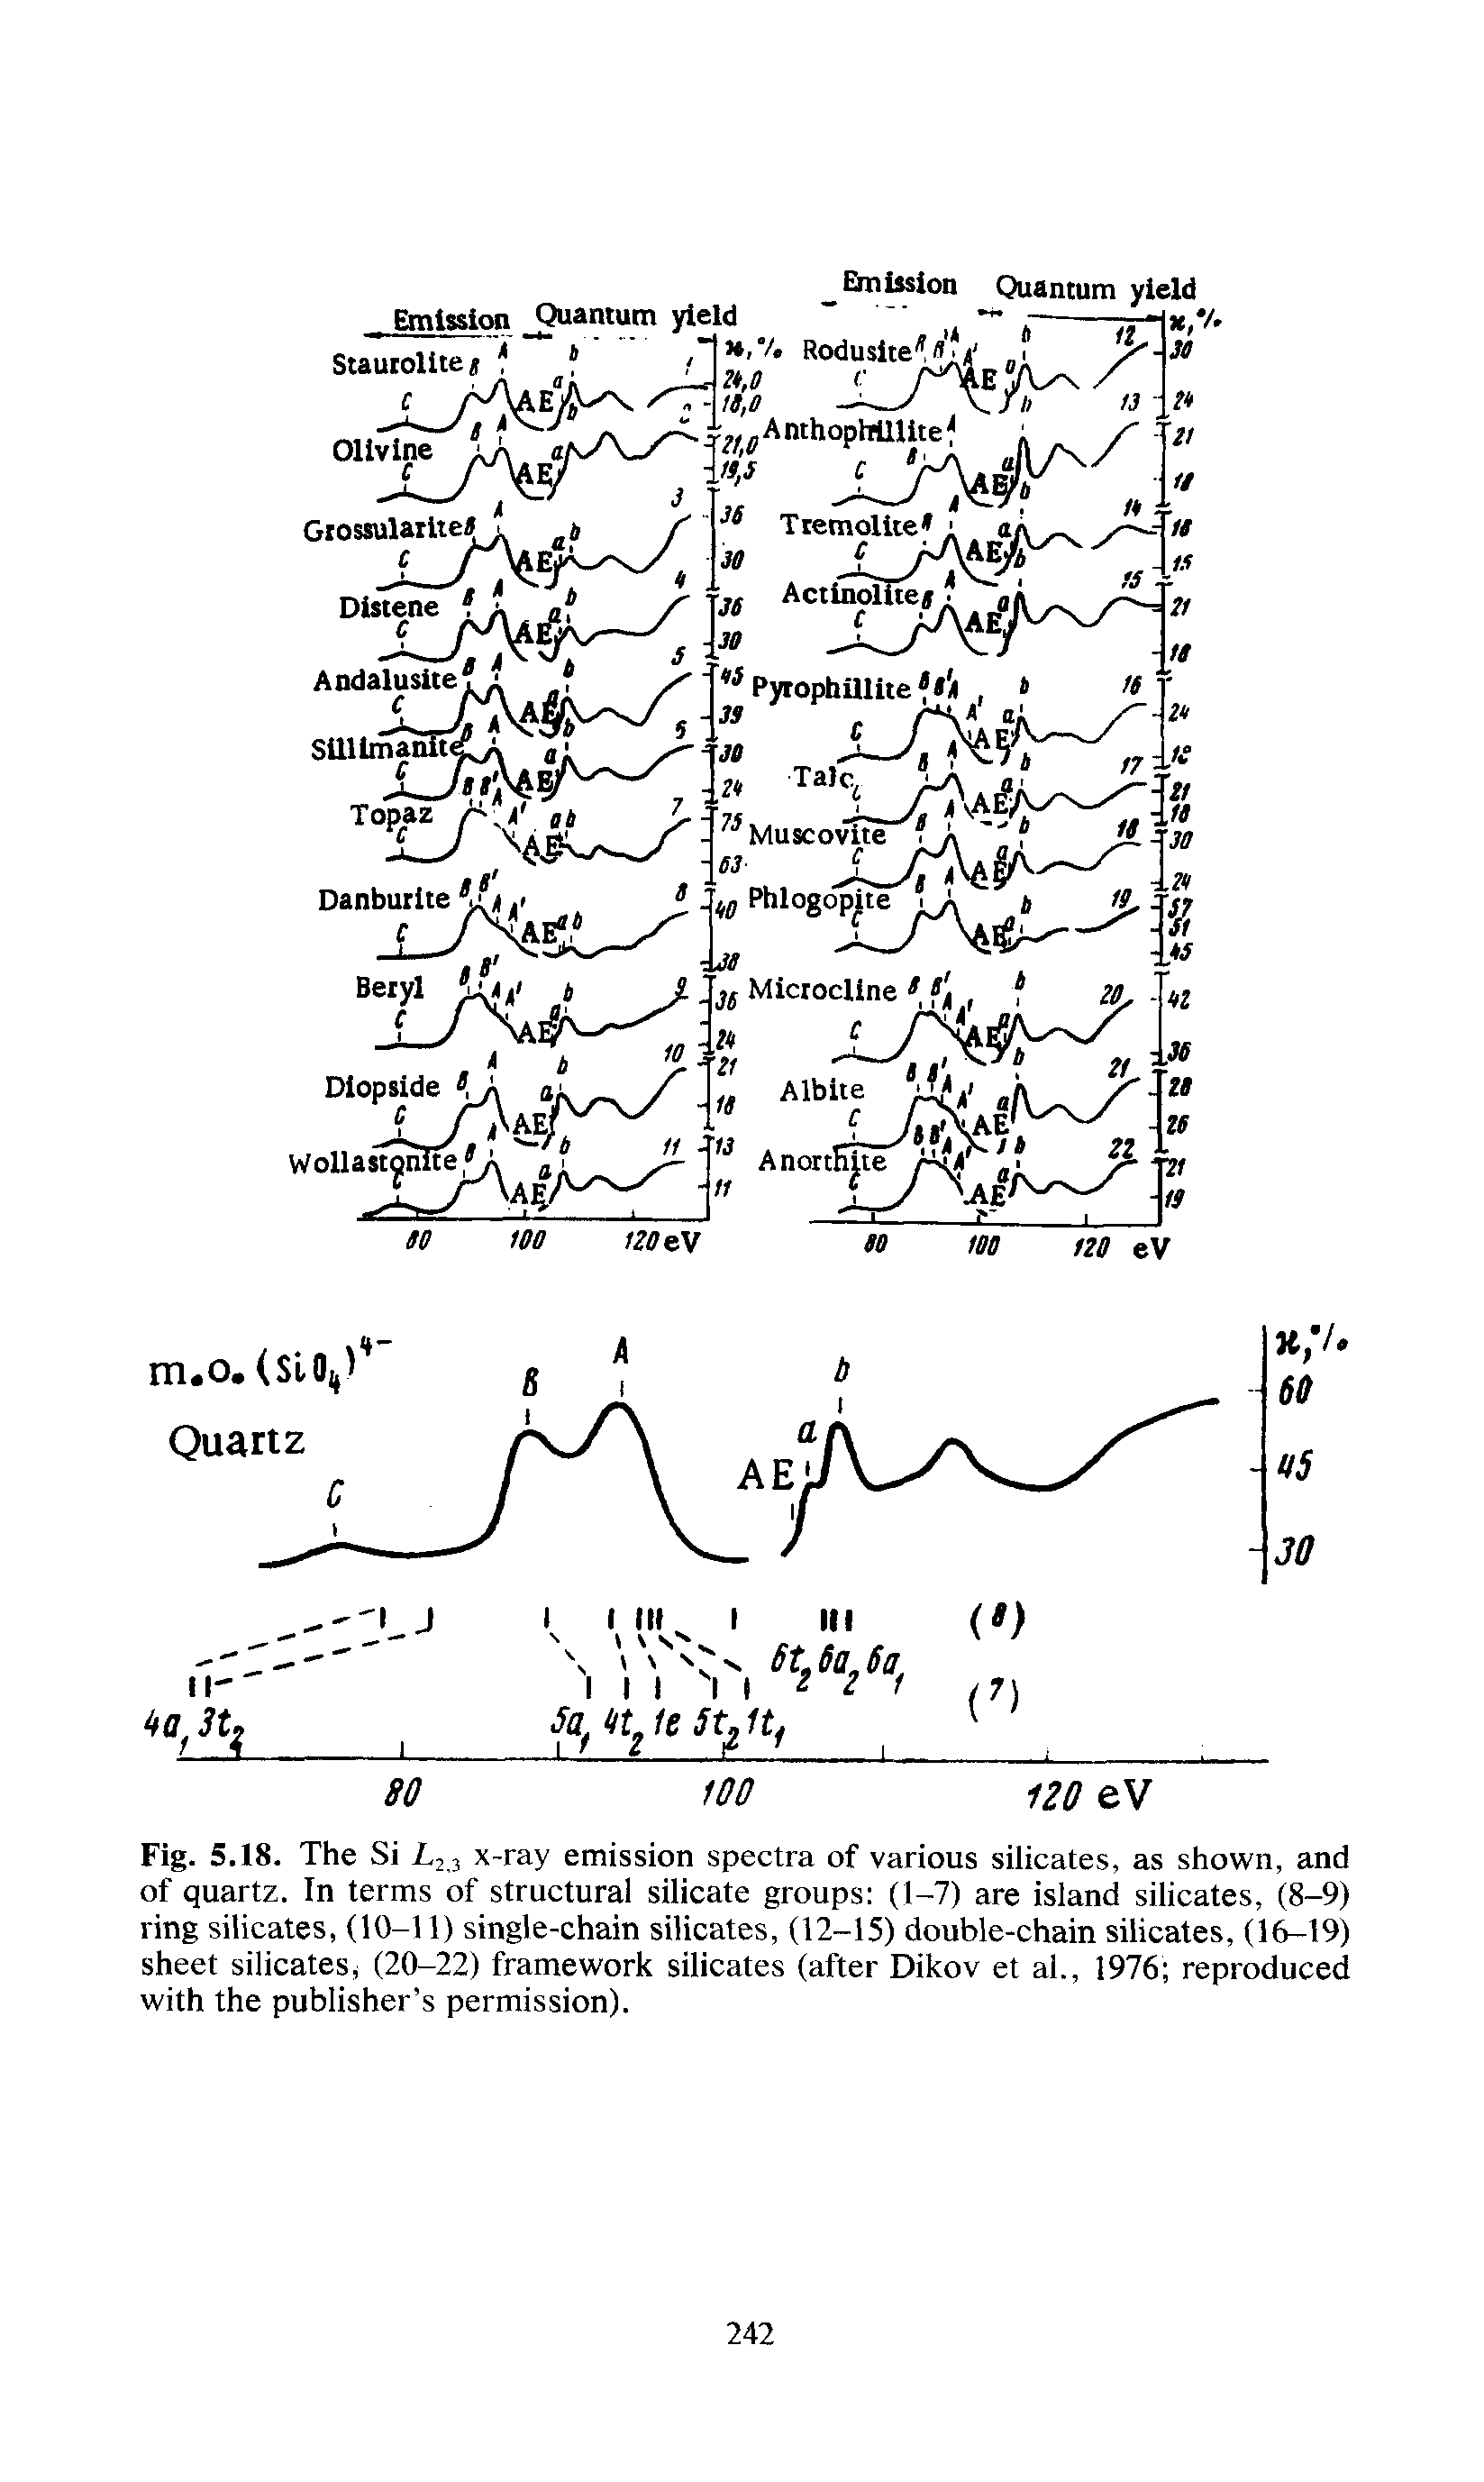 Fig. 5.18. The Si L2 3 x-ray emission spectra of various silicates, as shown, and of quartz. In terms of structural silicate groups (1-7) are island silicates, (8-9) ring silicates, (10-U) single-chain silicates, (12-15) double-chain silicates, (16-19) sheet silicatesj (20-22) framework silicates (after Dikov et al., 1976 reproduced with the publisher s permission).